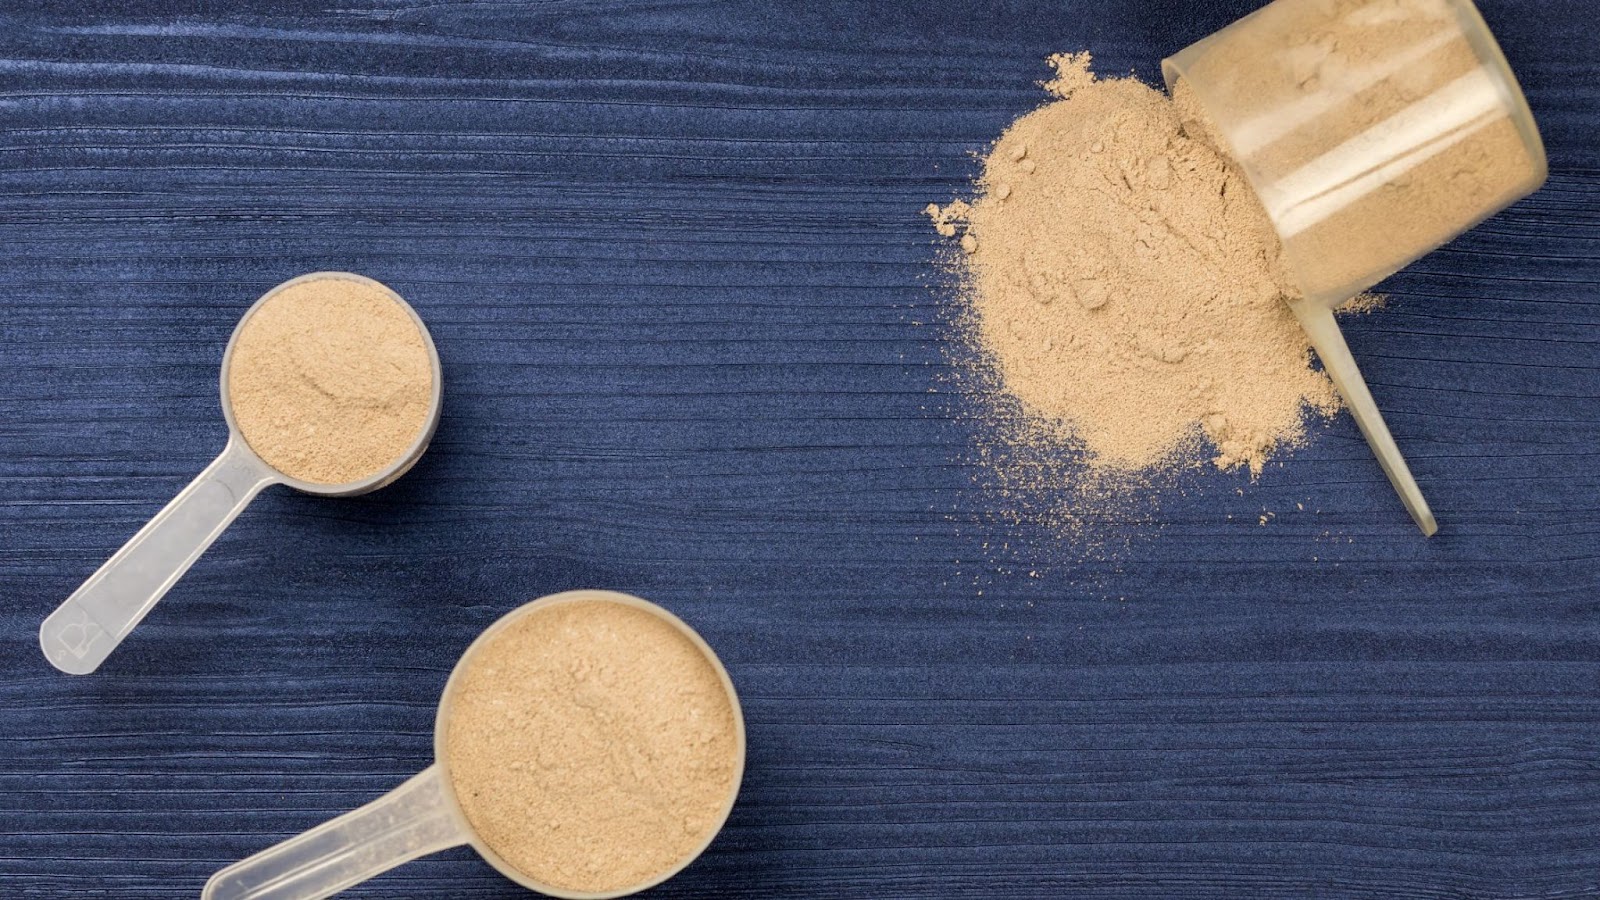 What to Mix Protein Powder With?